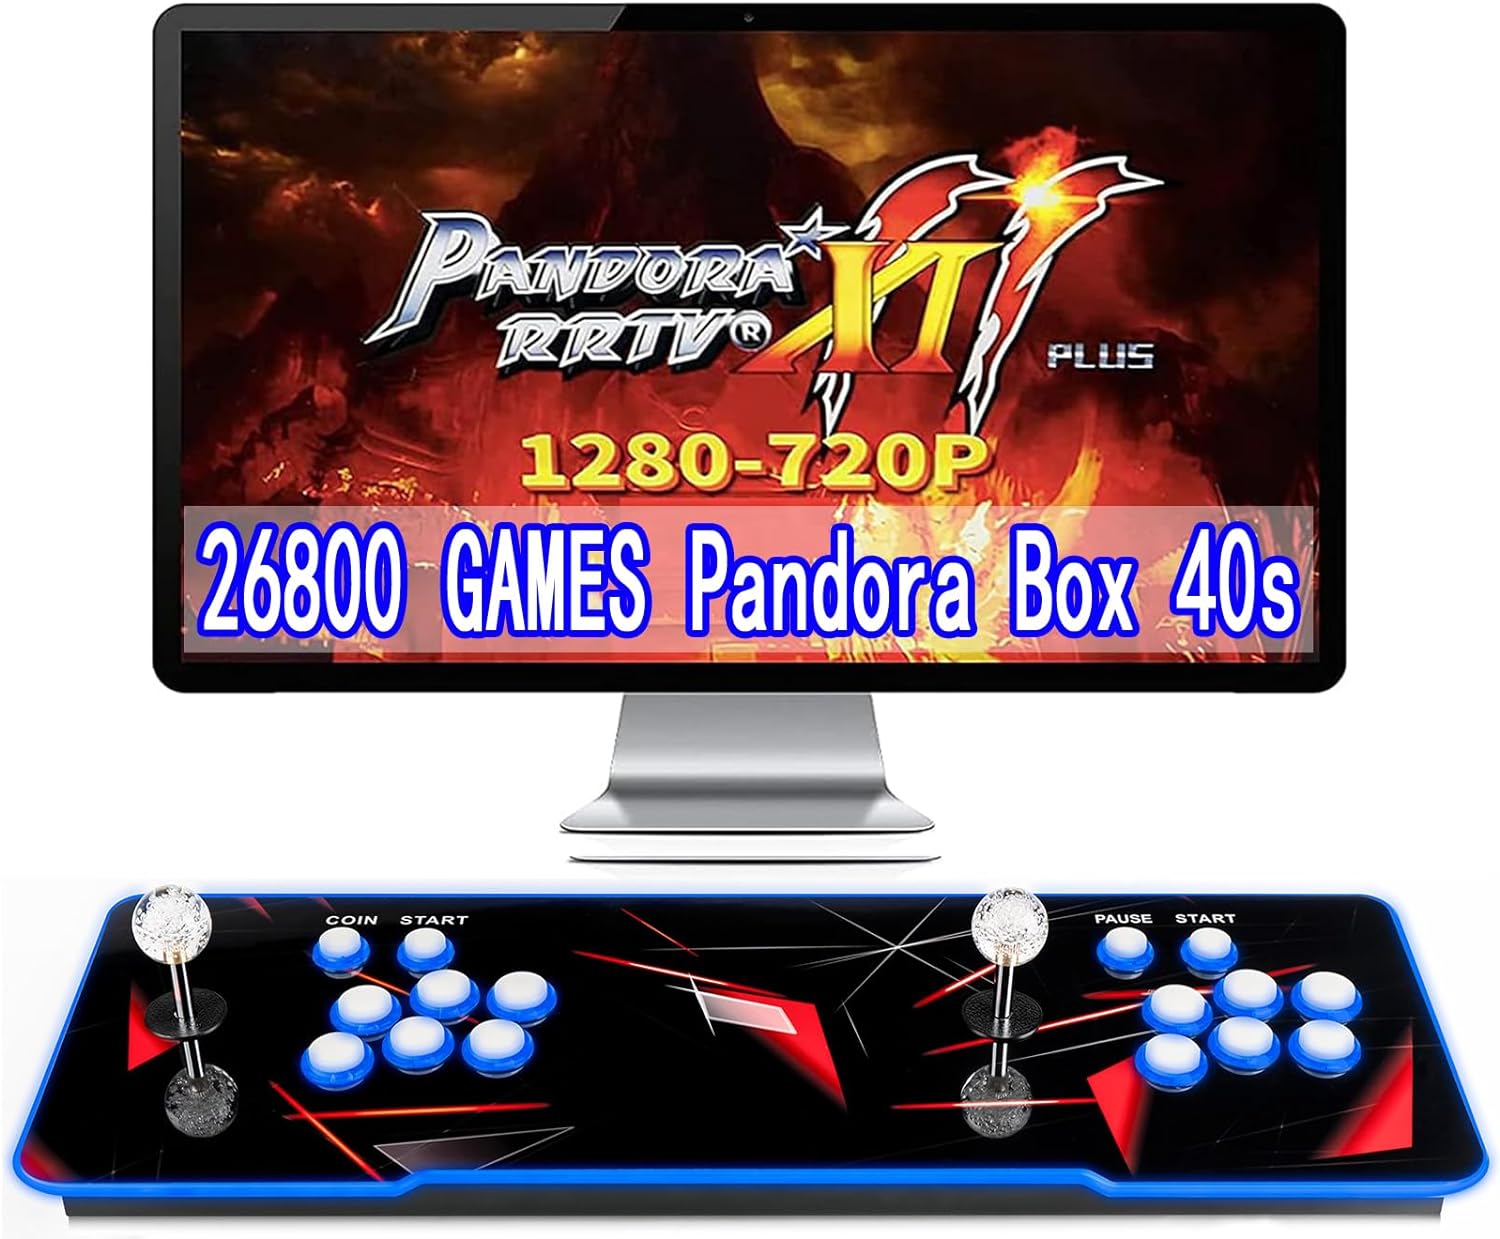 LIFAVOVY Upgraded Arcade Games Machines for Home Pandora Box 18s Arcade  Console - 8000 Games Installed, Support 3D Games,1280x720 Full HD,Favorite